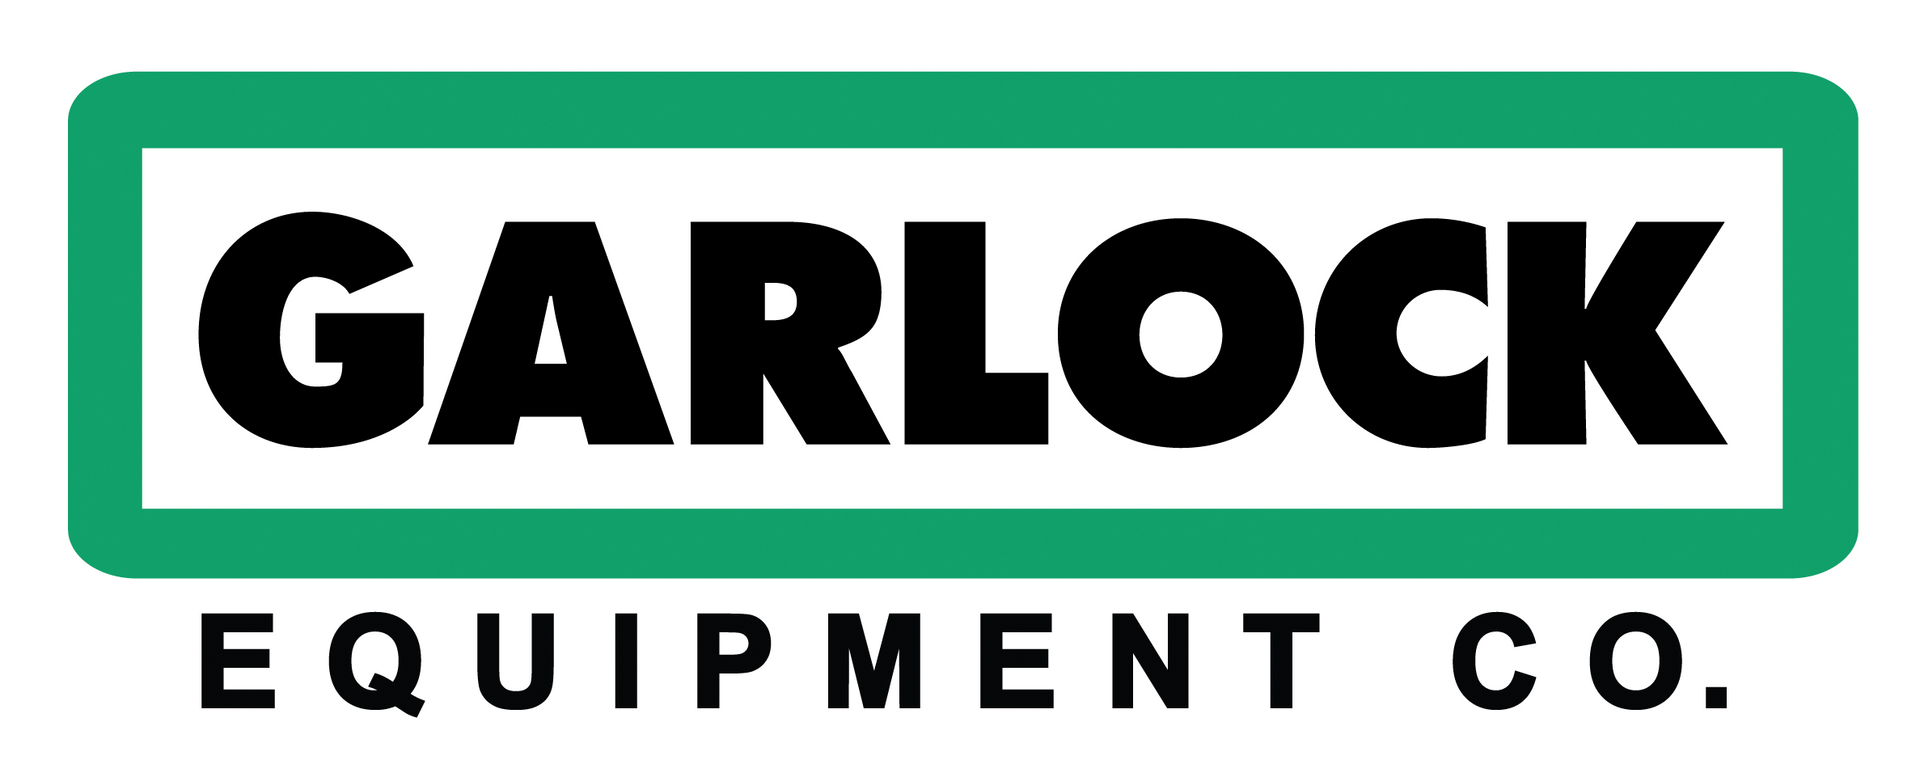 the garlock equipment co. logo is black and green on a white background .